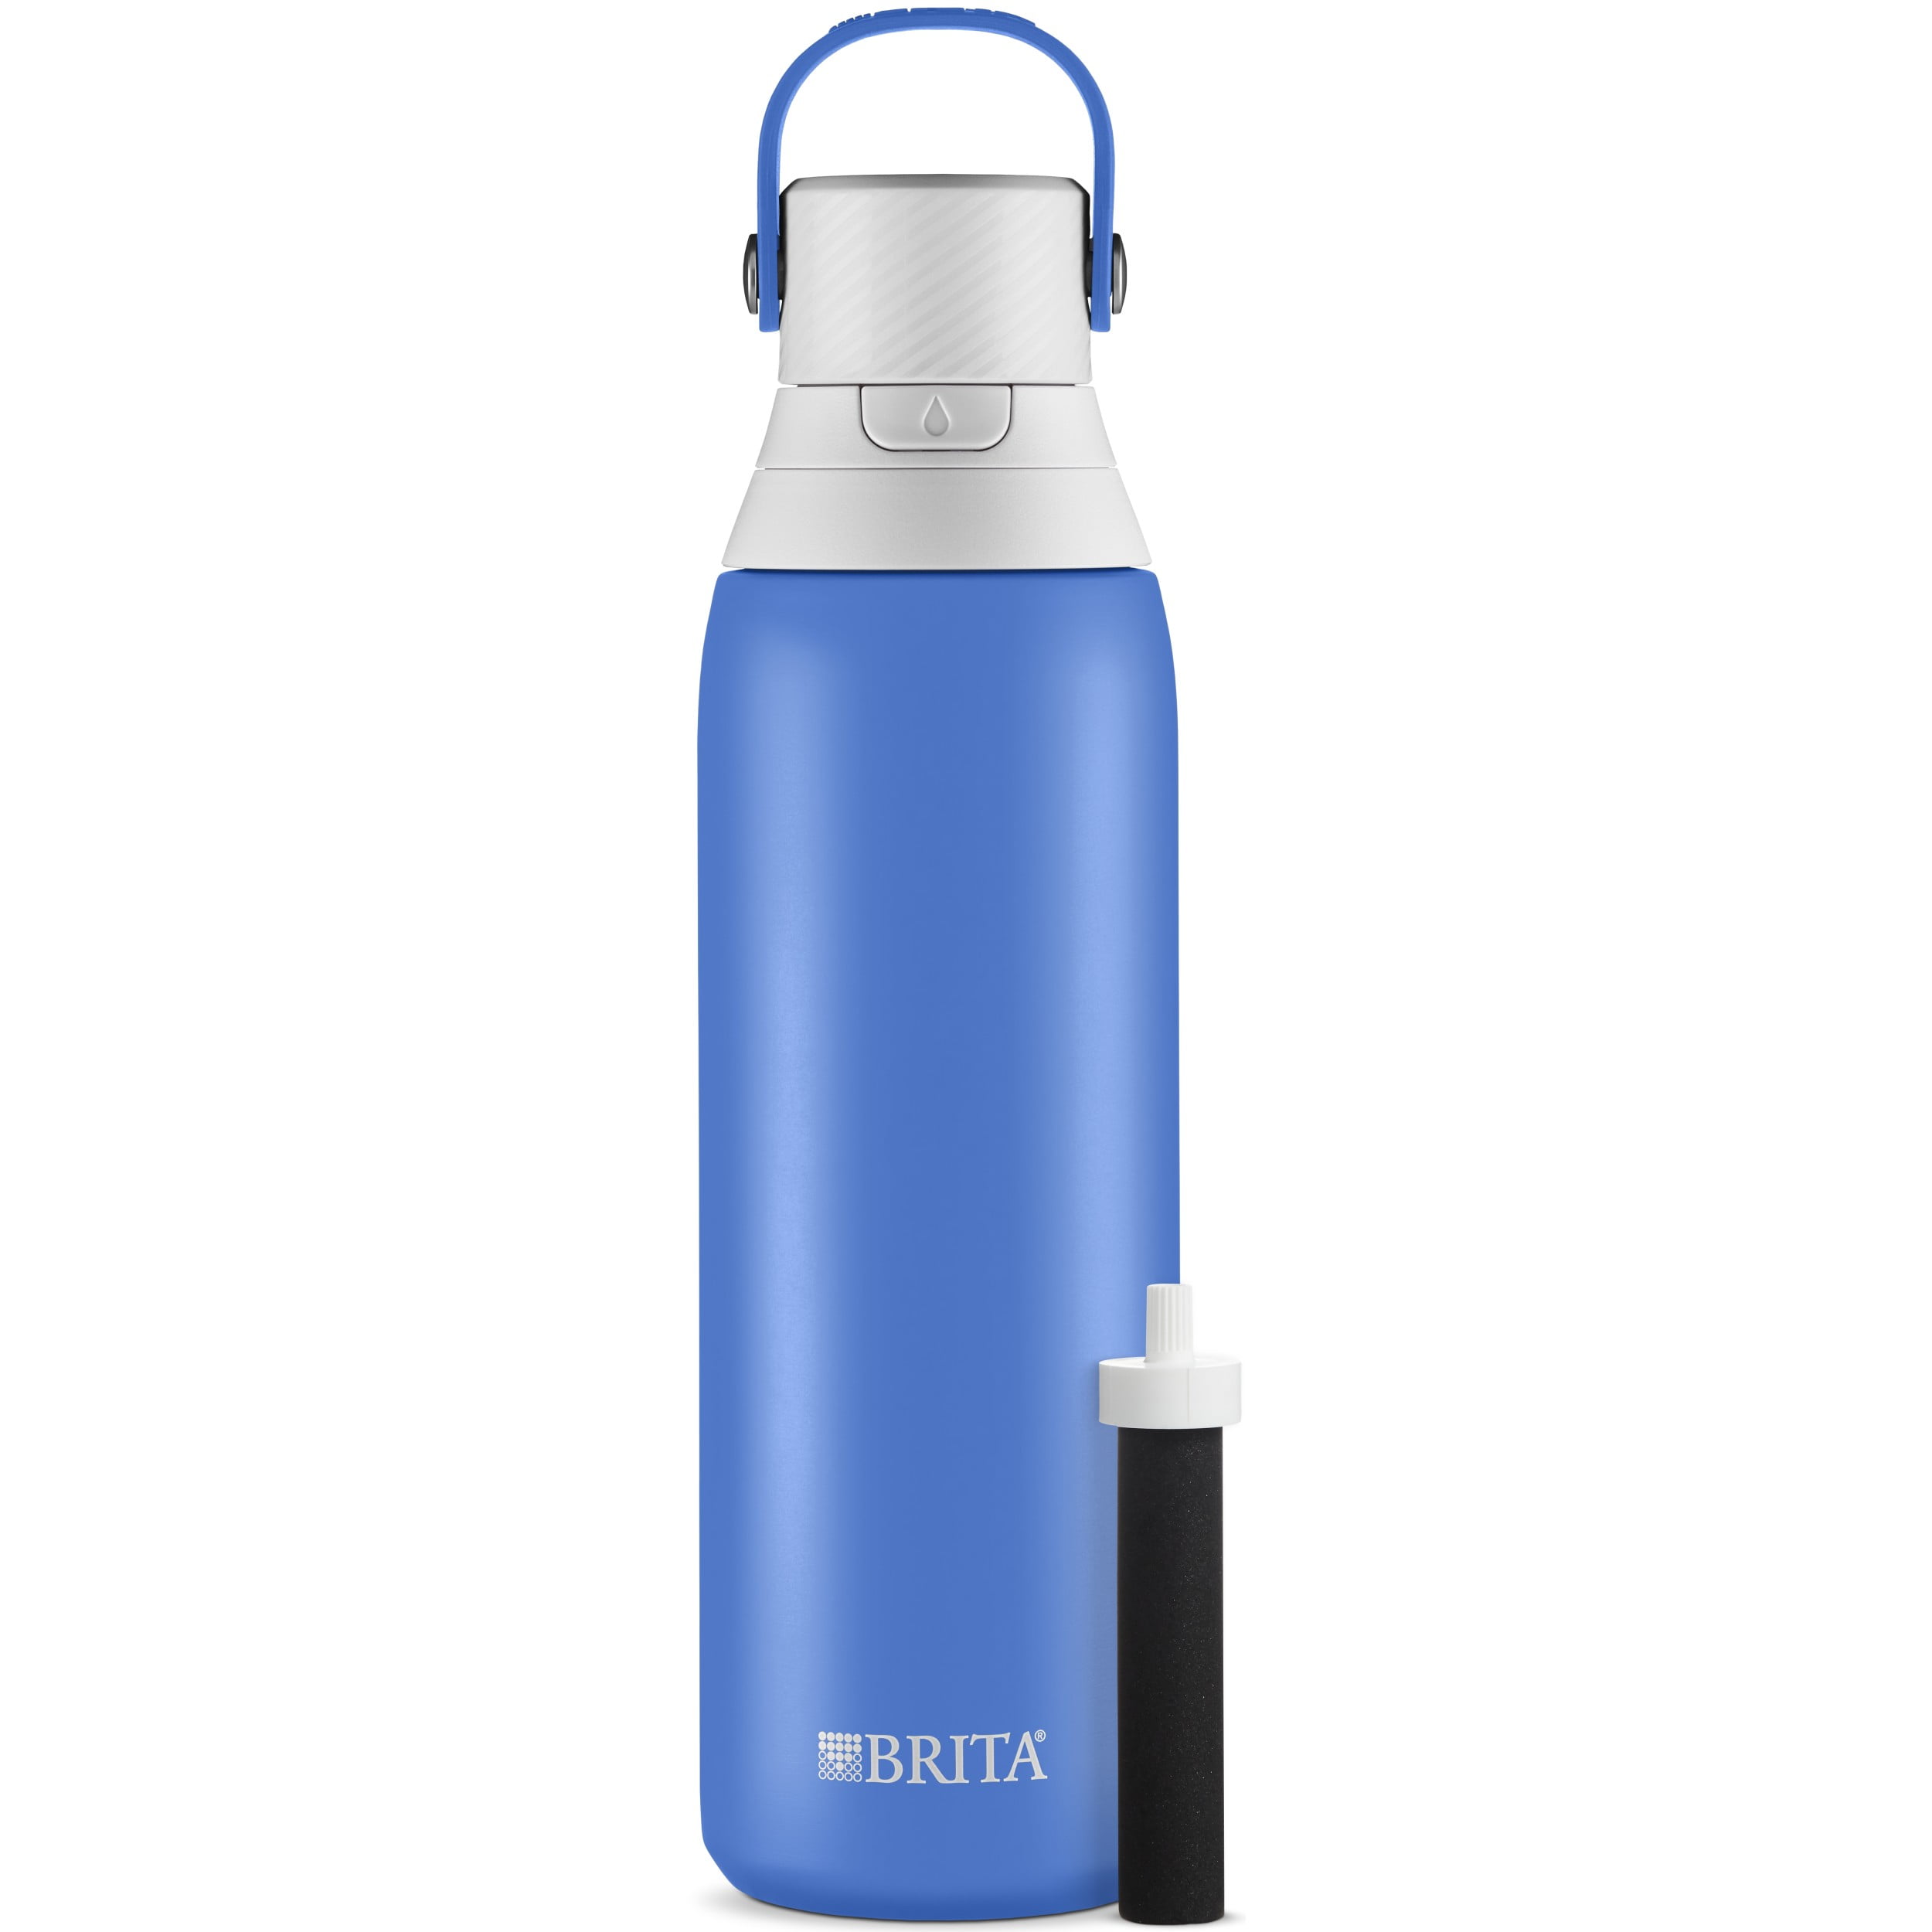 Brita Stainless Steel Water Bottle with Filter, 20 Ounce Water Bottle, Ocean and assorted colors